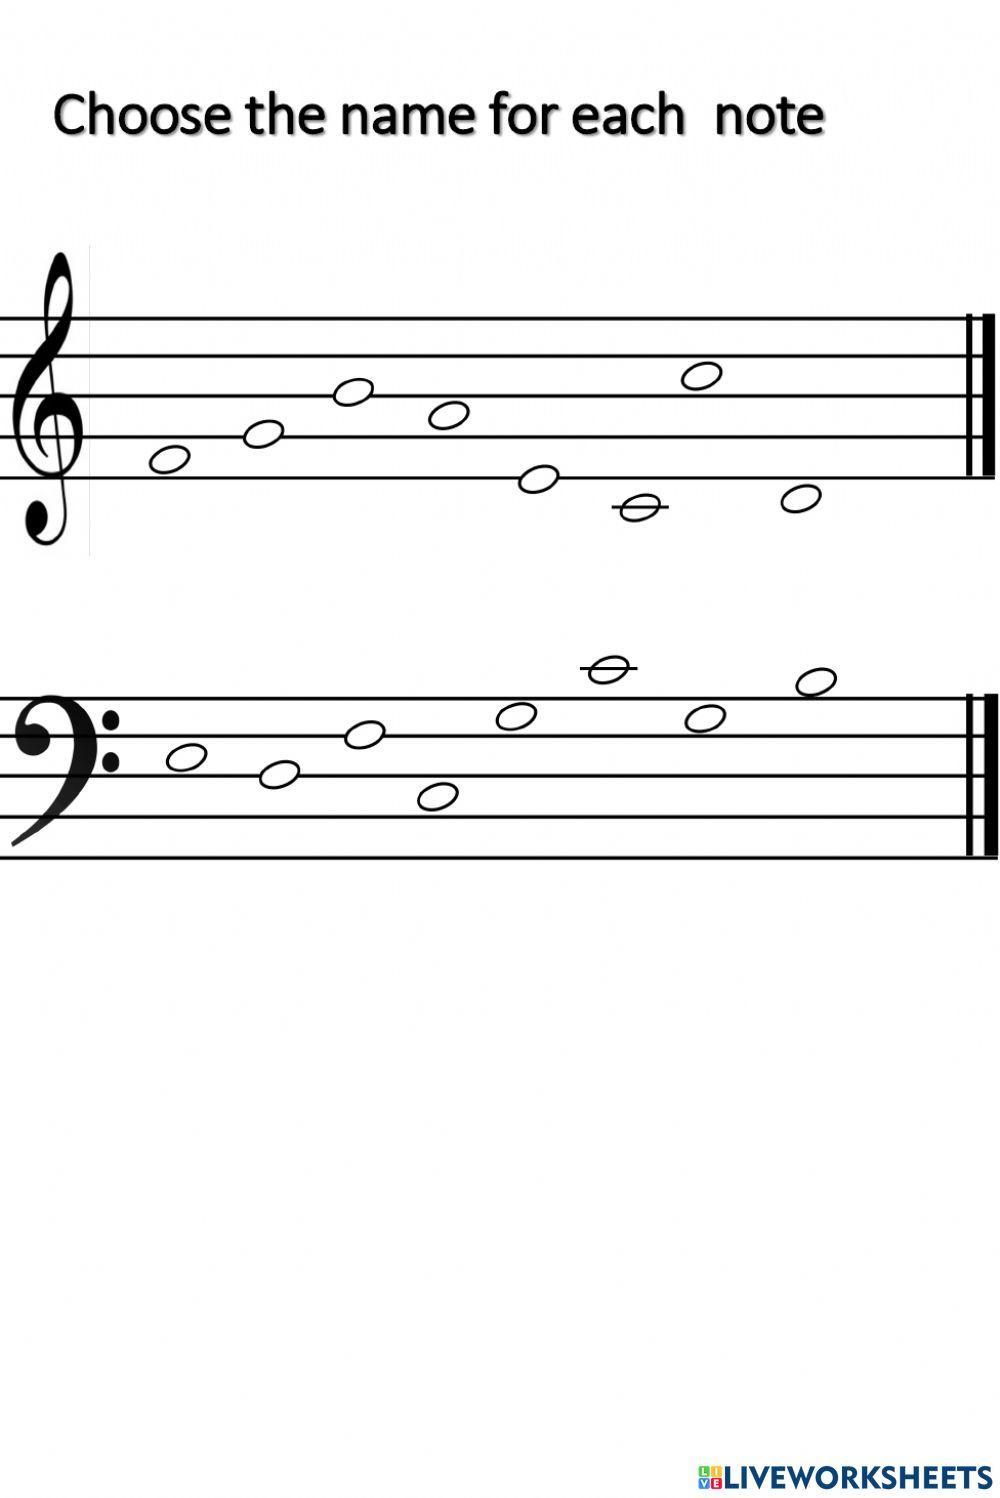 Treble clef and bass clef